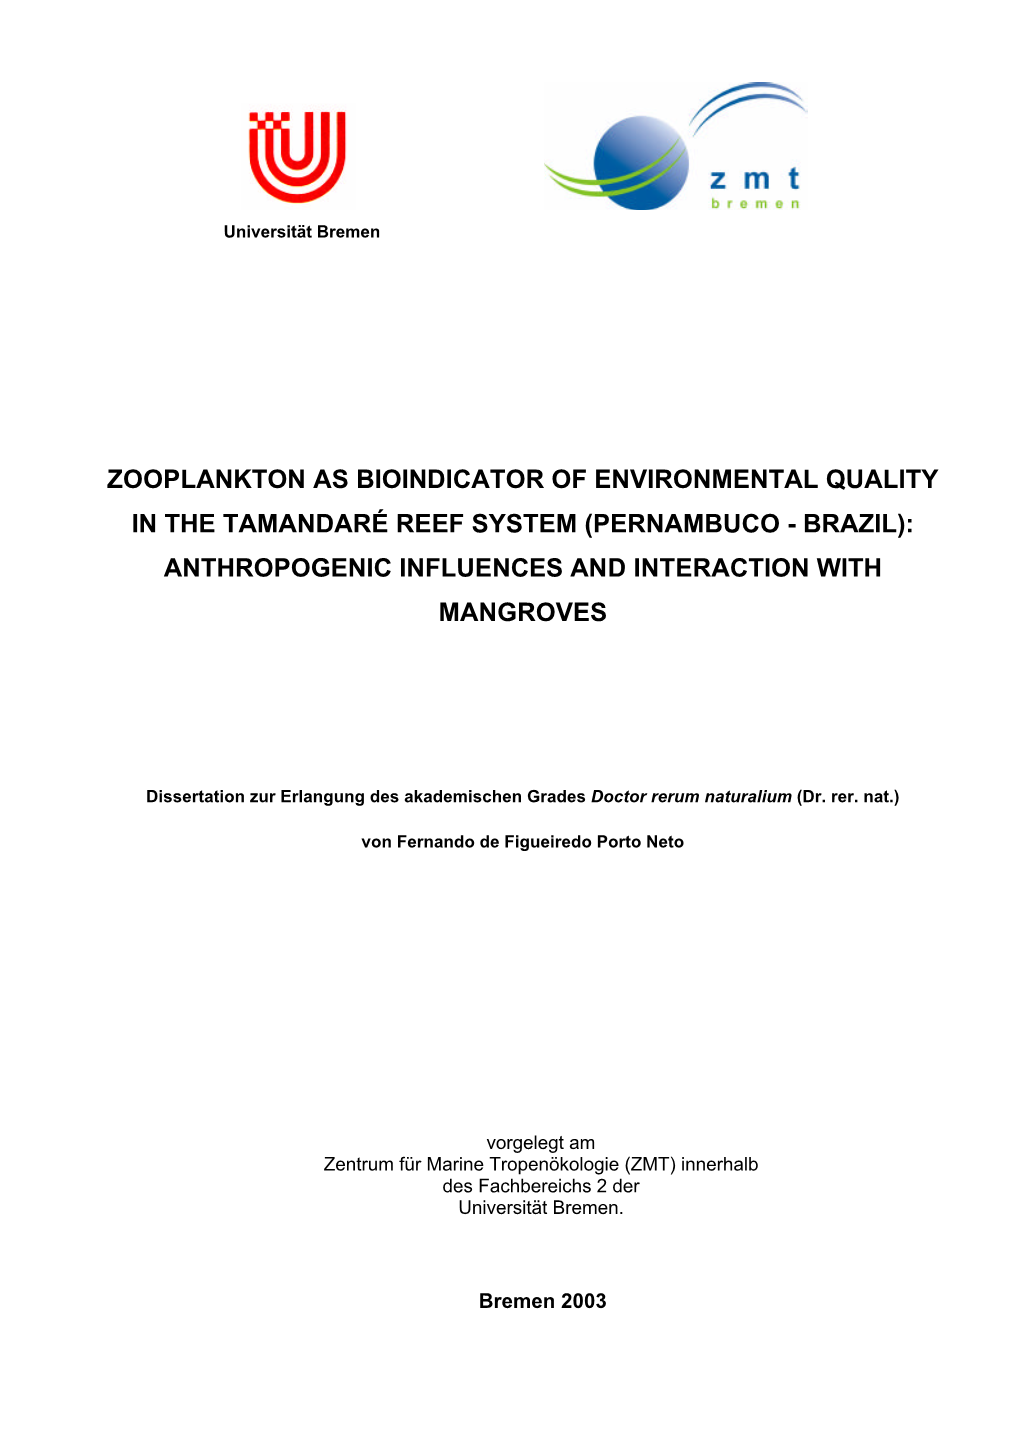 Zooplankton As Bioindicator of Environmental Quality in the Tamandaré Reef System (Pernambuco - Brazil): Anthropogenic Influences and Interaction with Mangroves